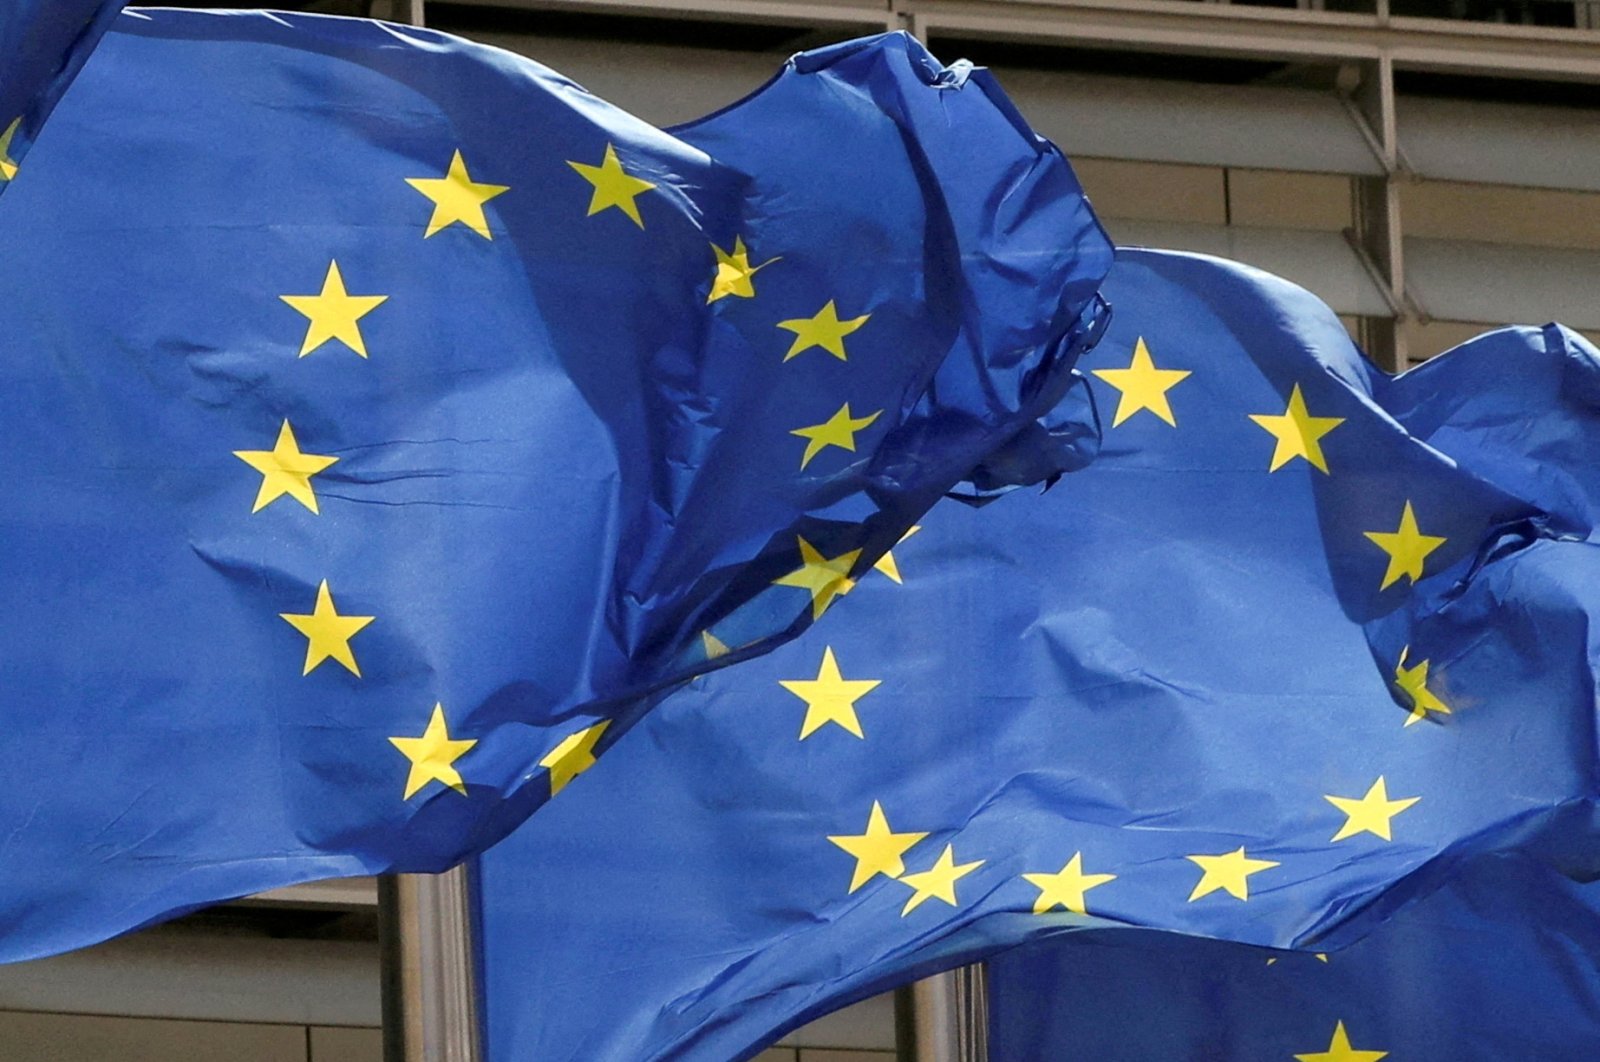 European Union flags flutter outside the European Commission headquarters in Brussels, Belgium, May 5, 2021. (Reuters Photo)